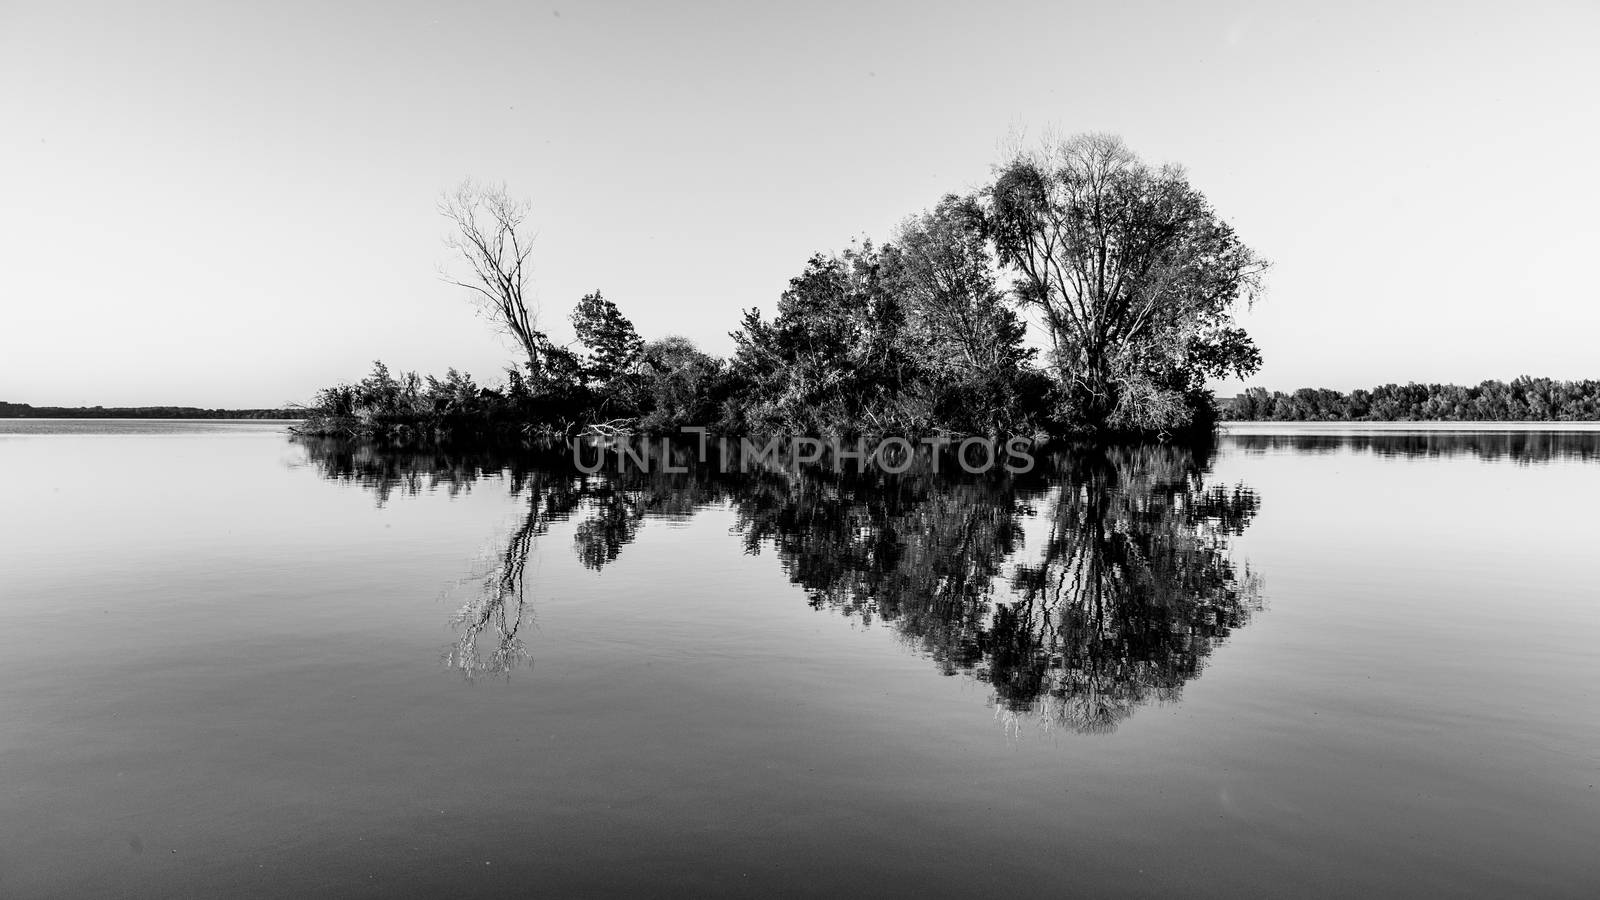 Small island with trees reflected in calm water of Nove Mlyny Dam, Moravia, Czech Republic. Black and white image.